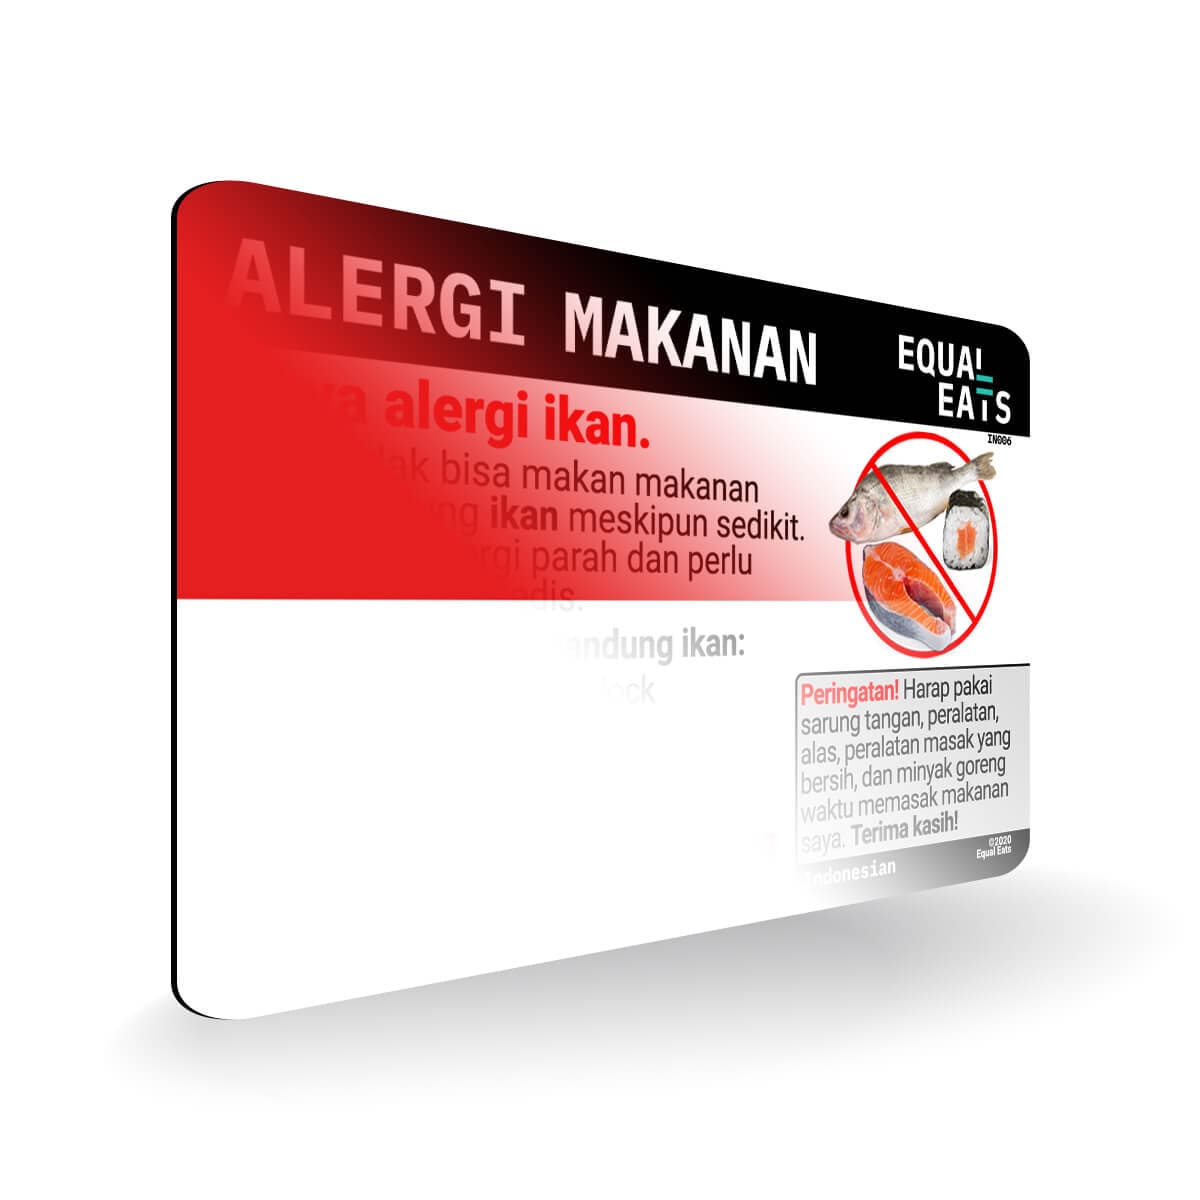 Fish Allergy in Indonesian. Fish Allergy Card for Indonesia